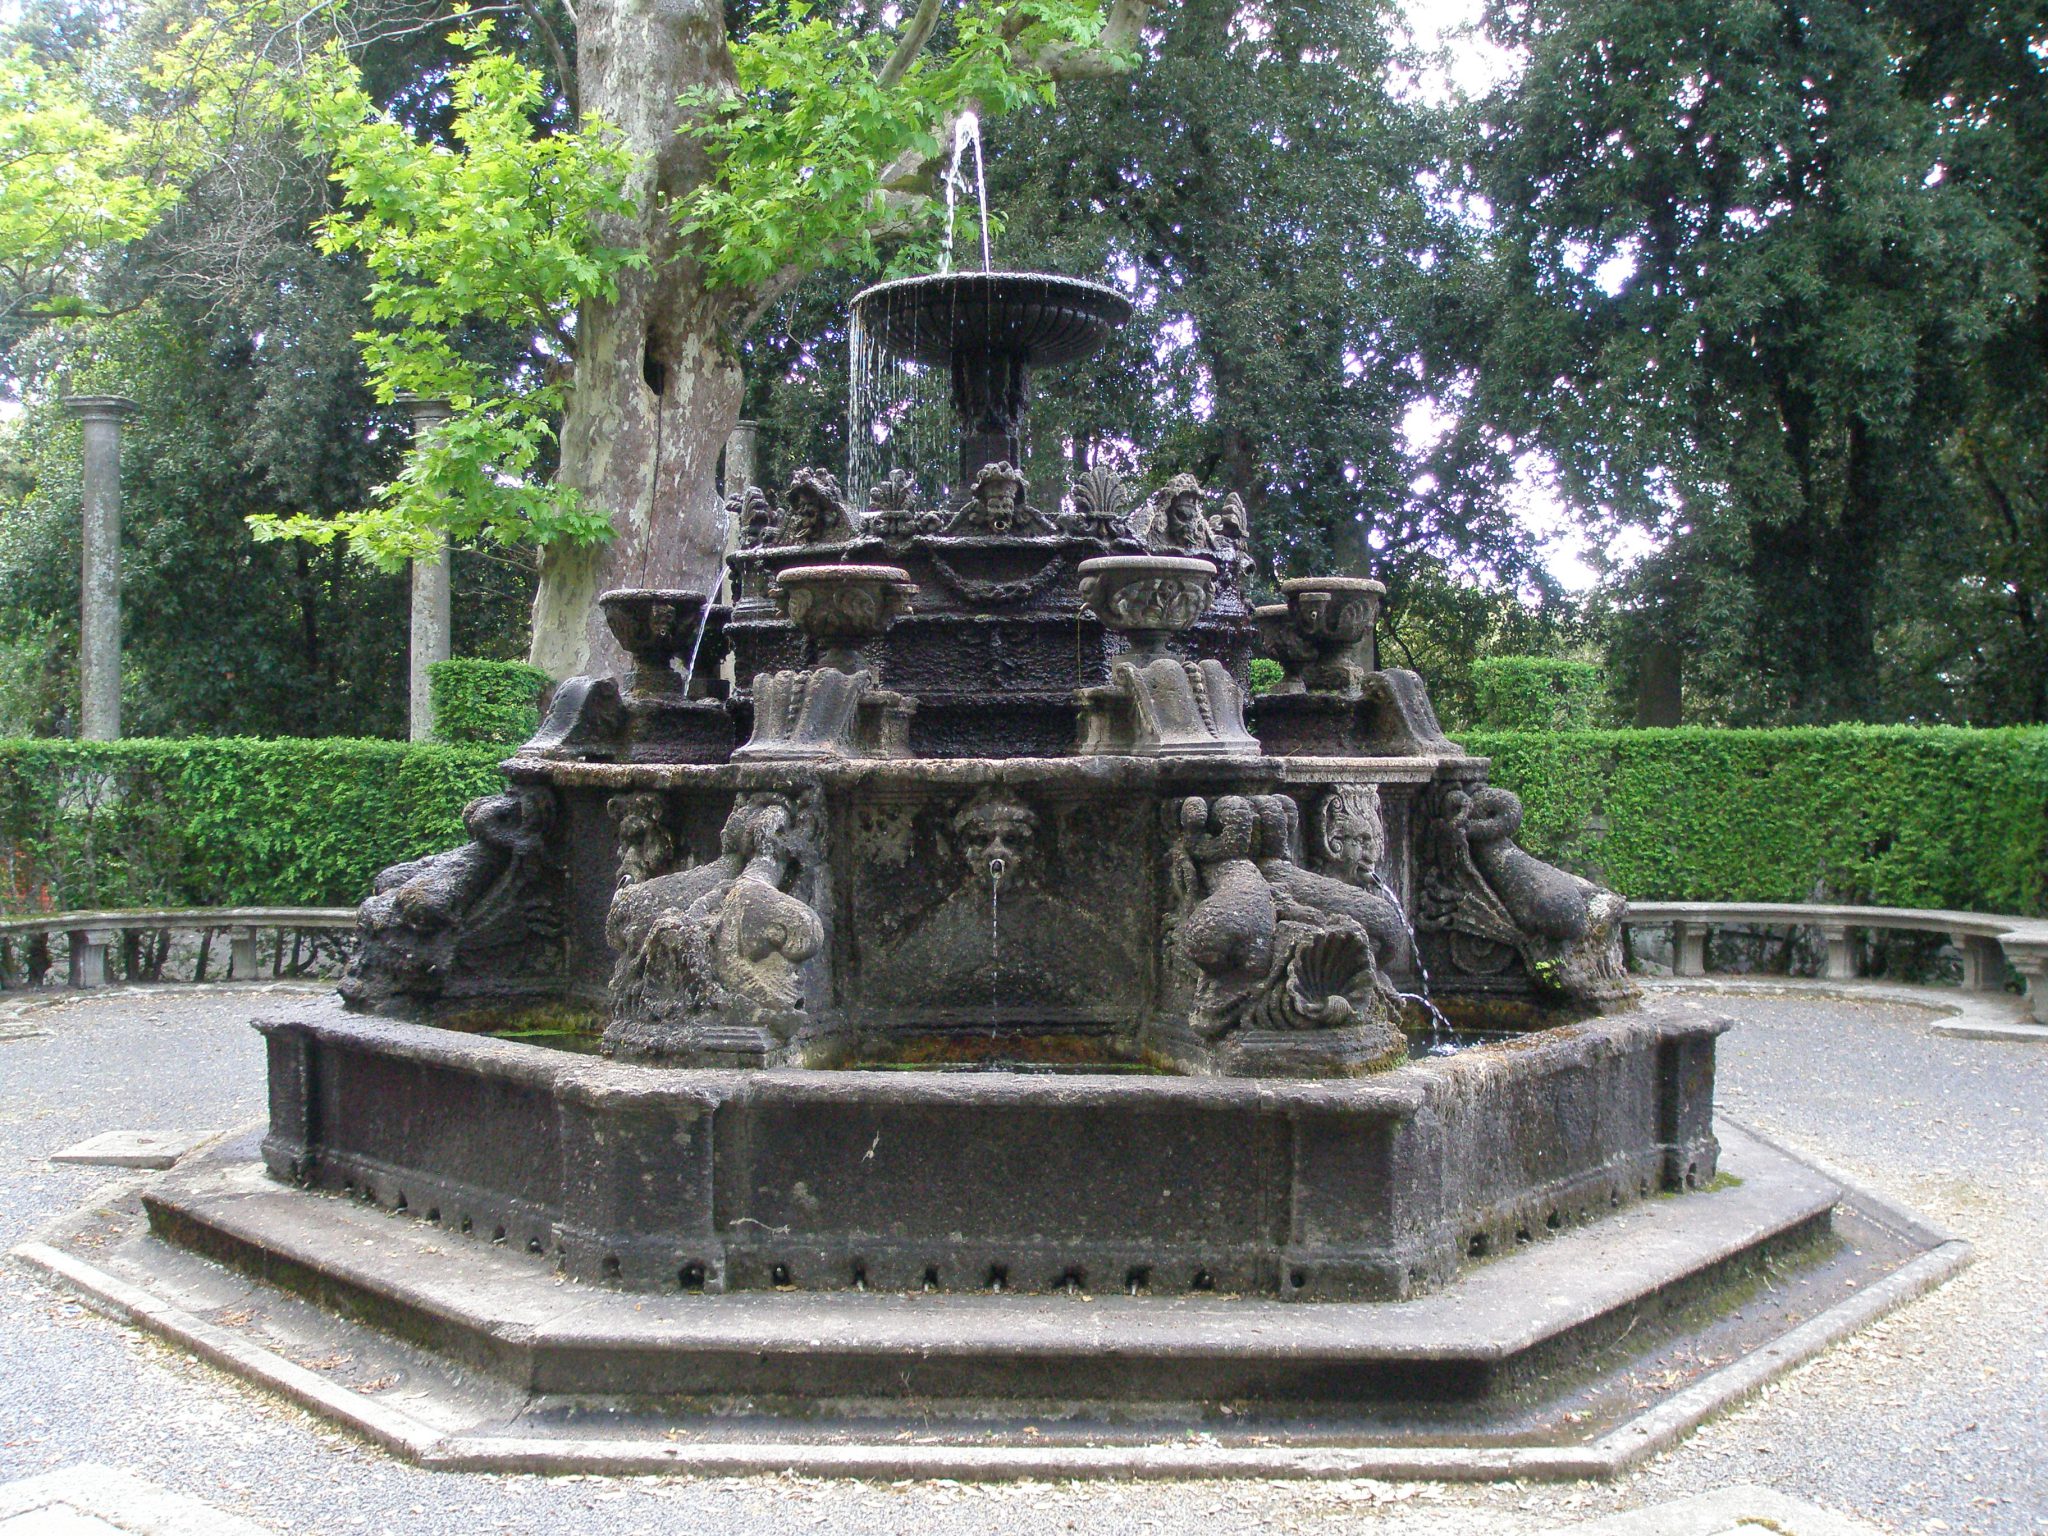 The Fountain of the Dolphins was once enclosed with a wooden trellis, which was covered with vines. Joke fountains were triggered by the movements of passers-by....step on the wrong stone, and you got soaked.